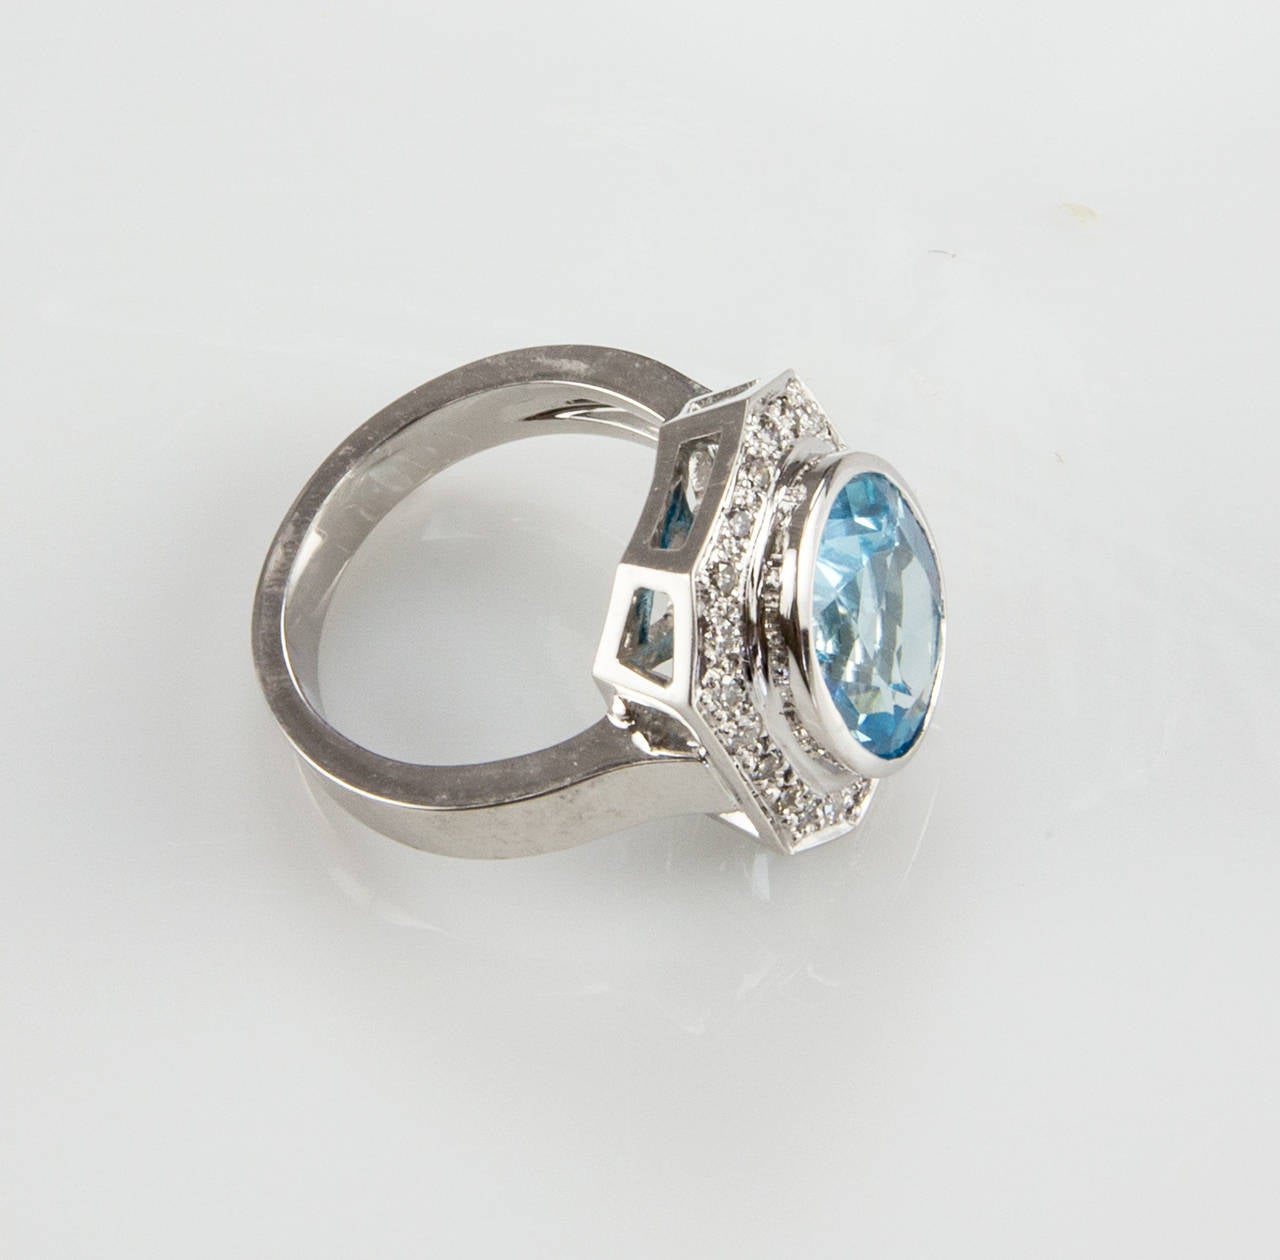 Centering an Oval 8.10 Carat Blue Topaz surrounded by twenty-four round cut diamonds; approx .24tctw; beautifully hand crafted in 18k white gold mounting; Ring size: 7.25. We offer complimentary ring re-sizing. (14mm x 12mm x 6.5mm). A Chic and Show